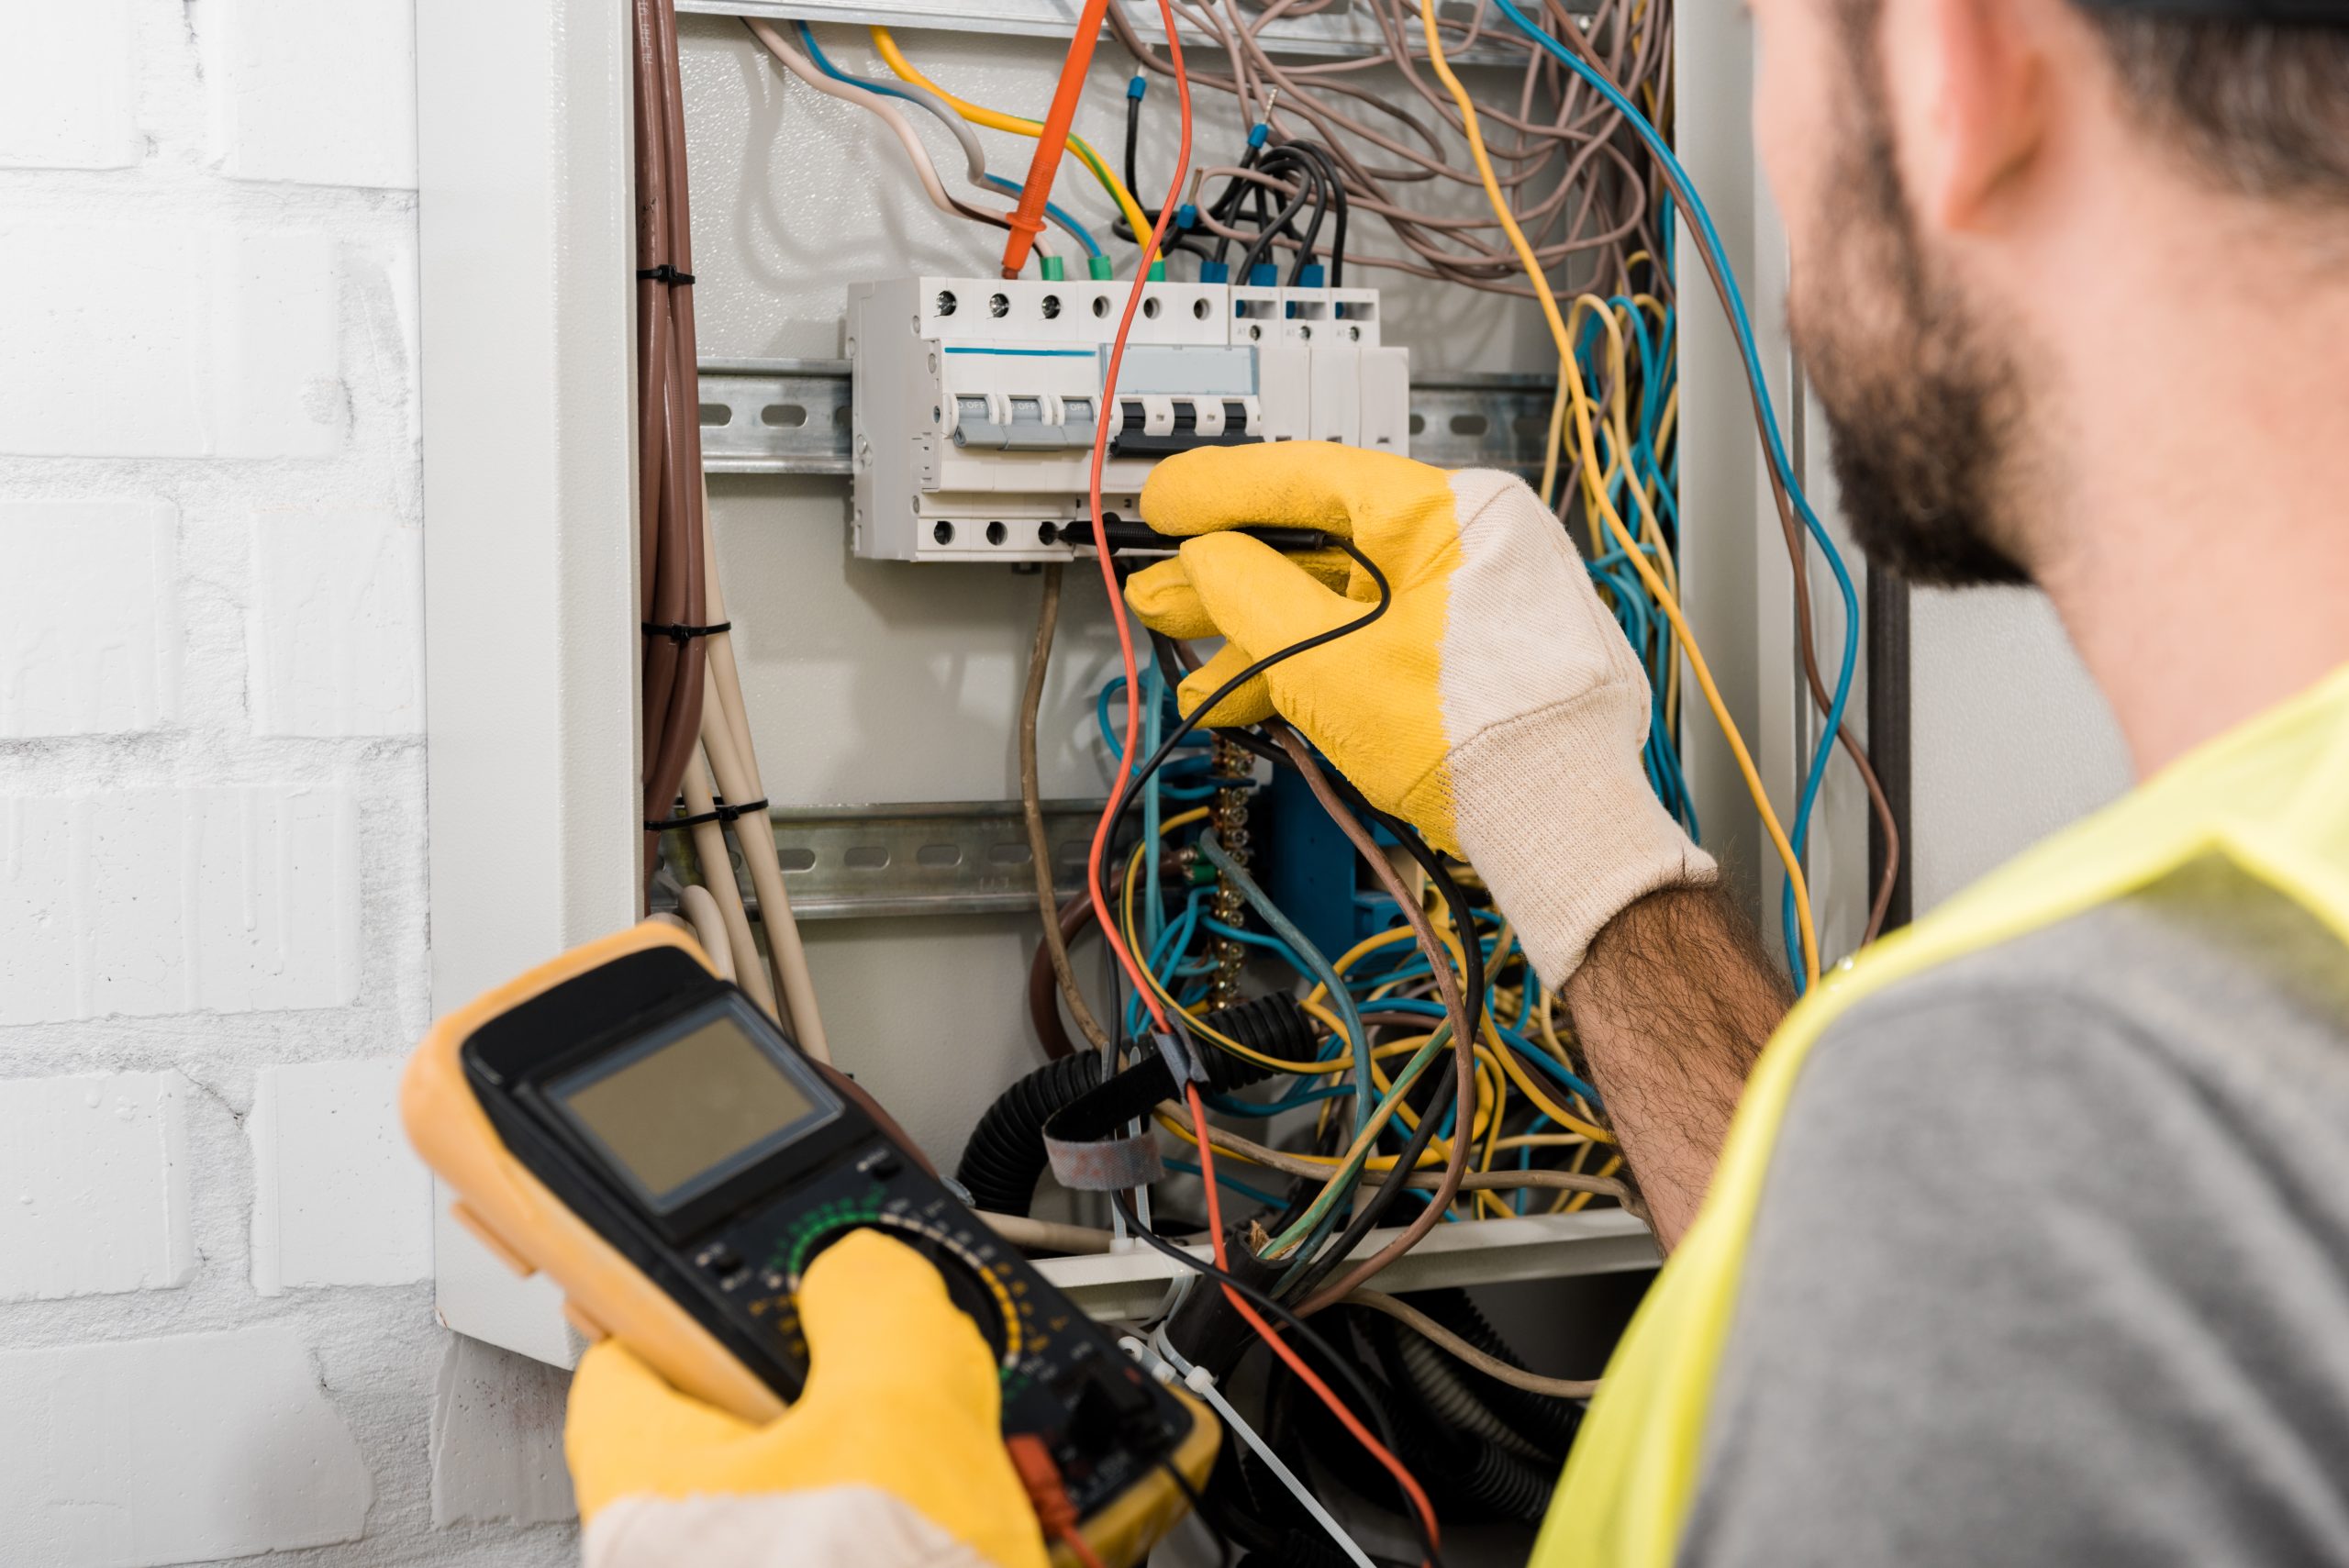 VistaCreate-217089698-stock-photo-cropped-image-electrician-checking-electrical